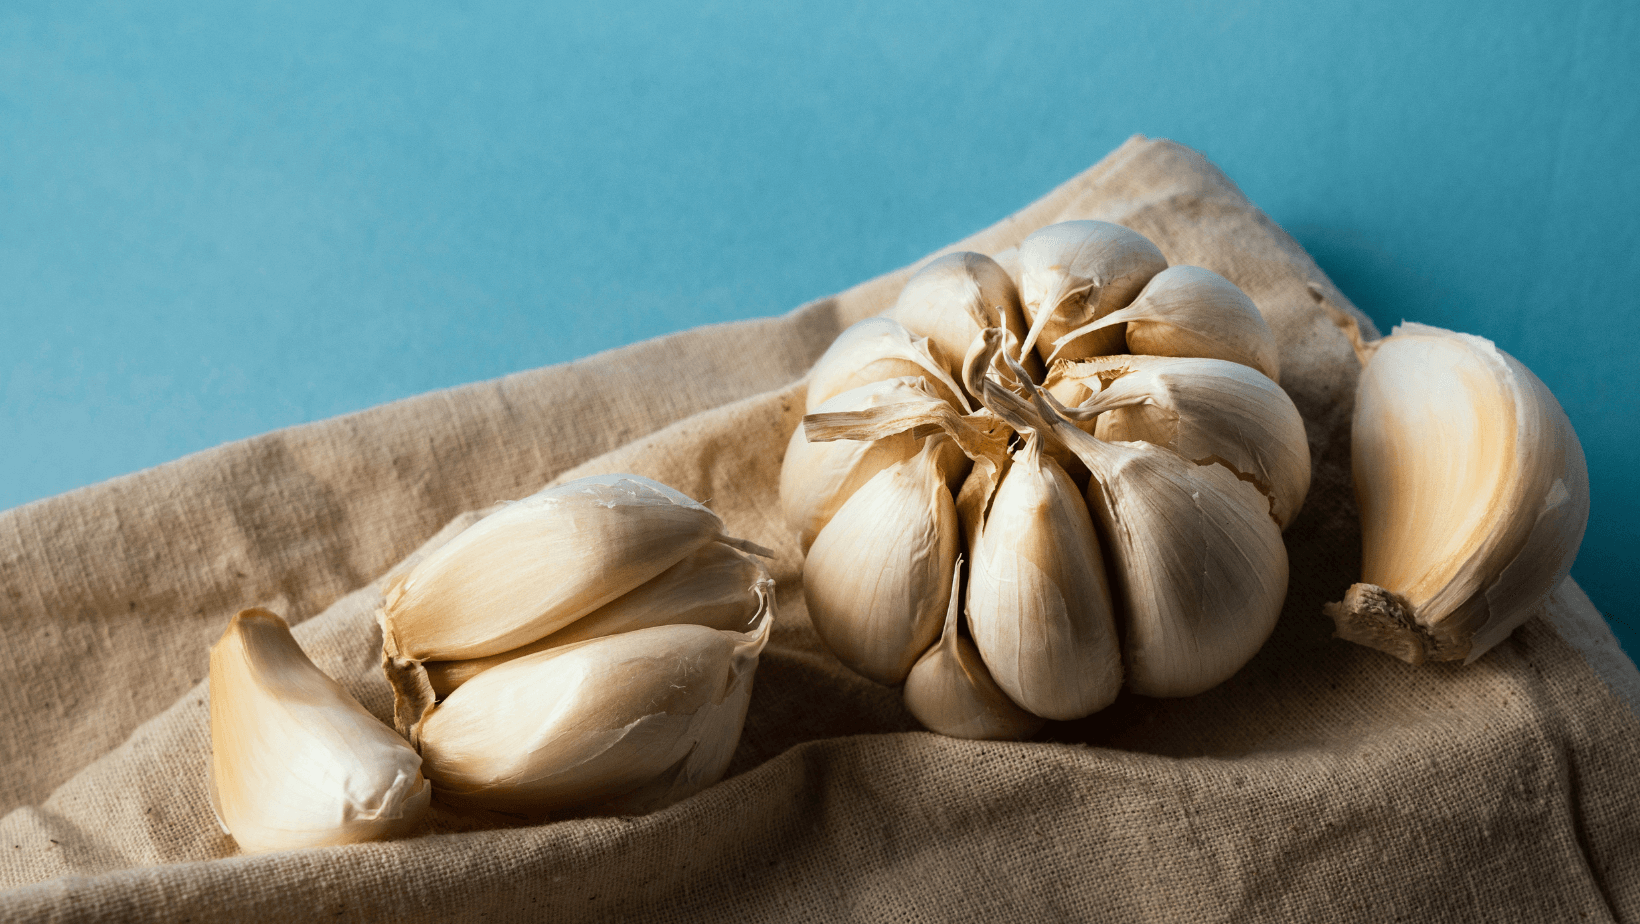 Garlic as a Supplement To Dog Food